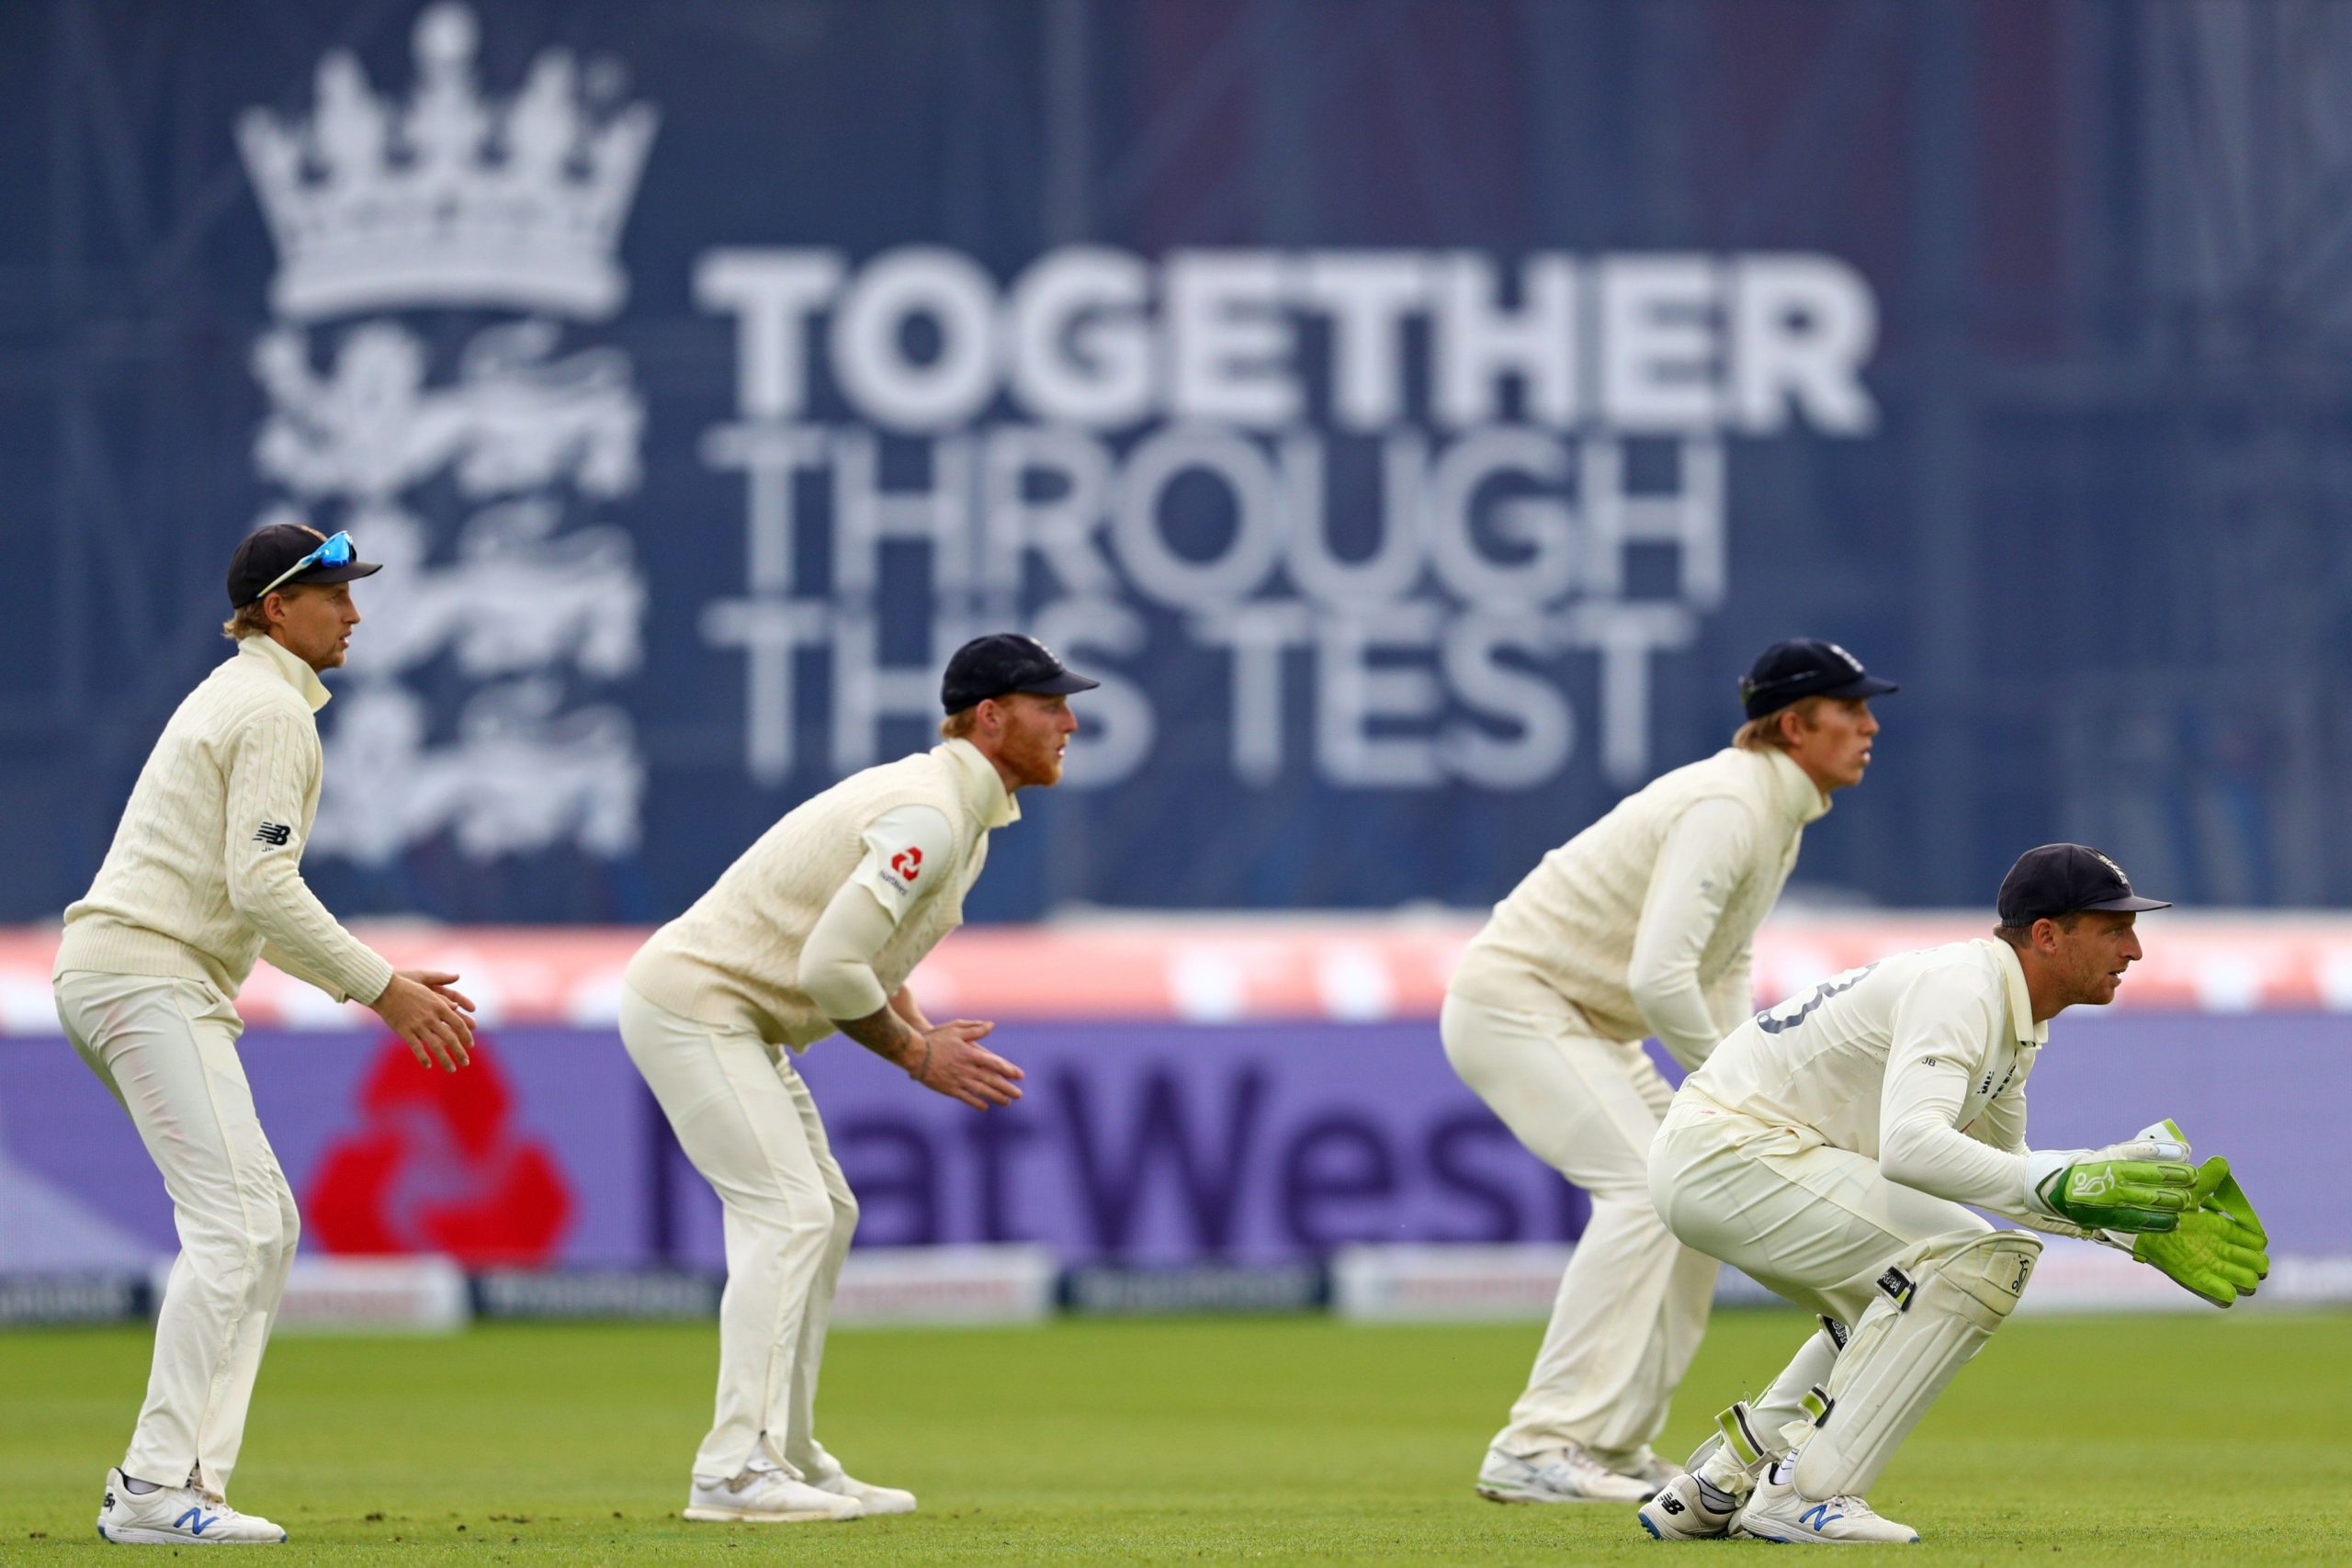 India vs England Test series schedule unlikely to change: Report